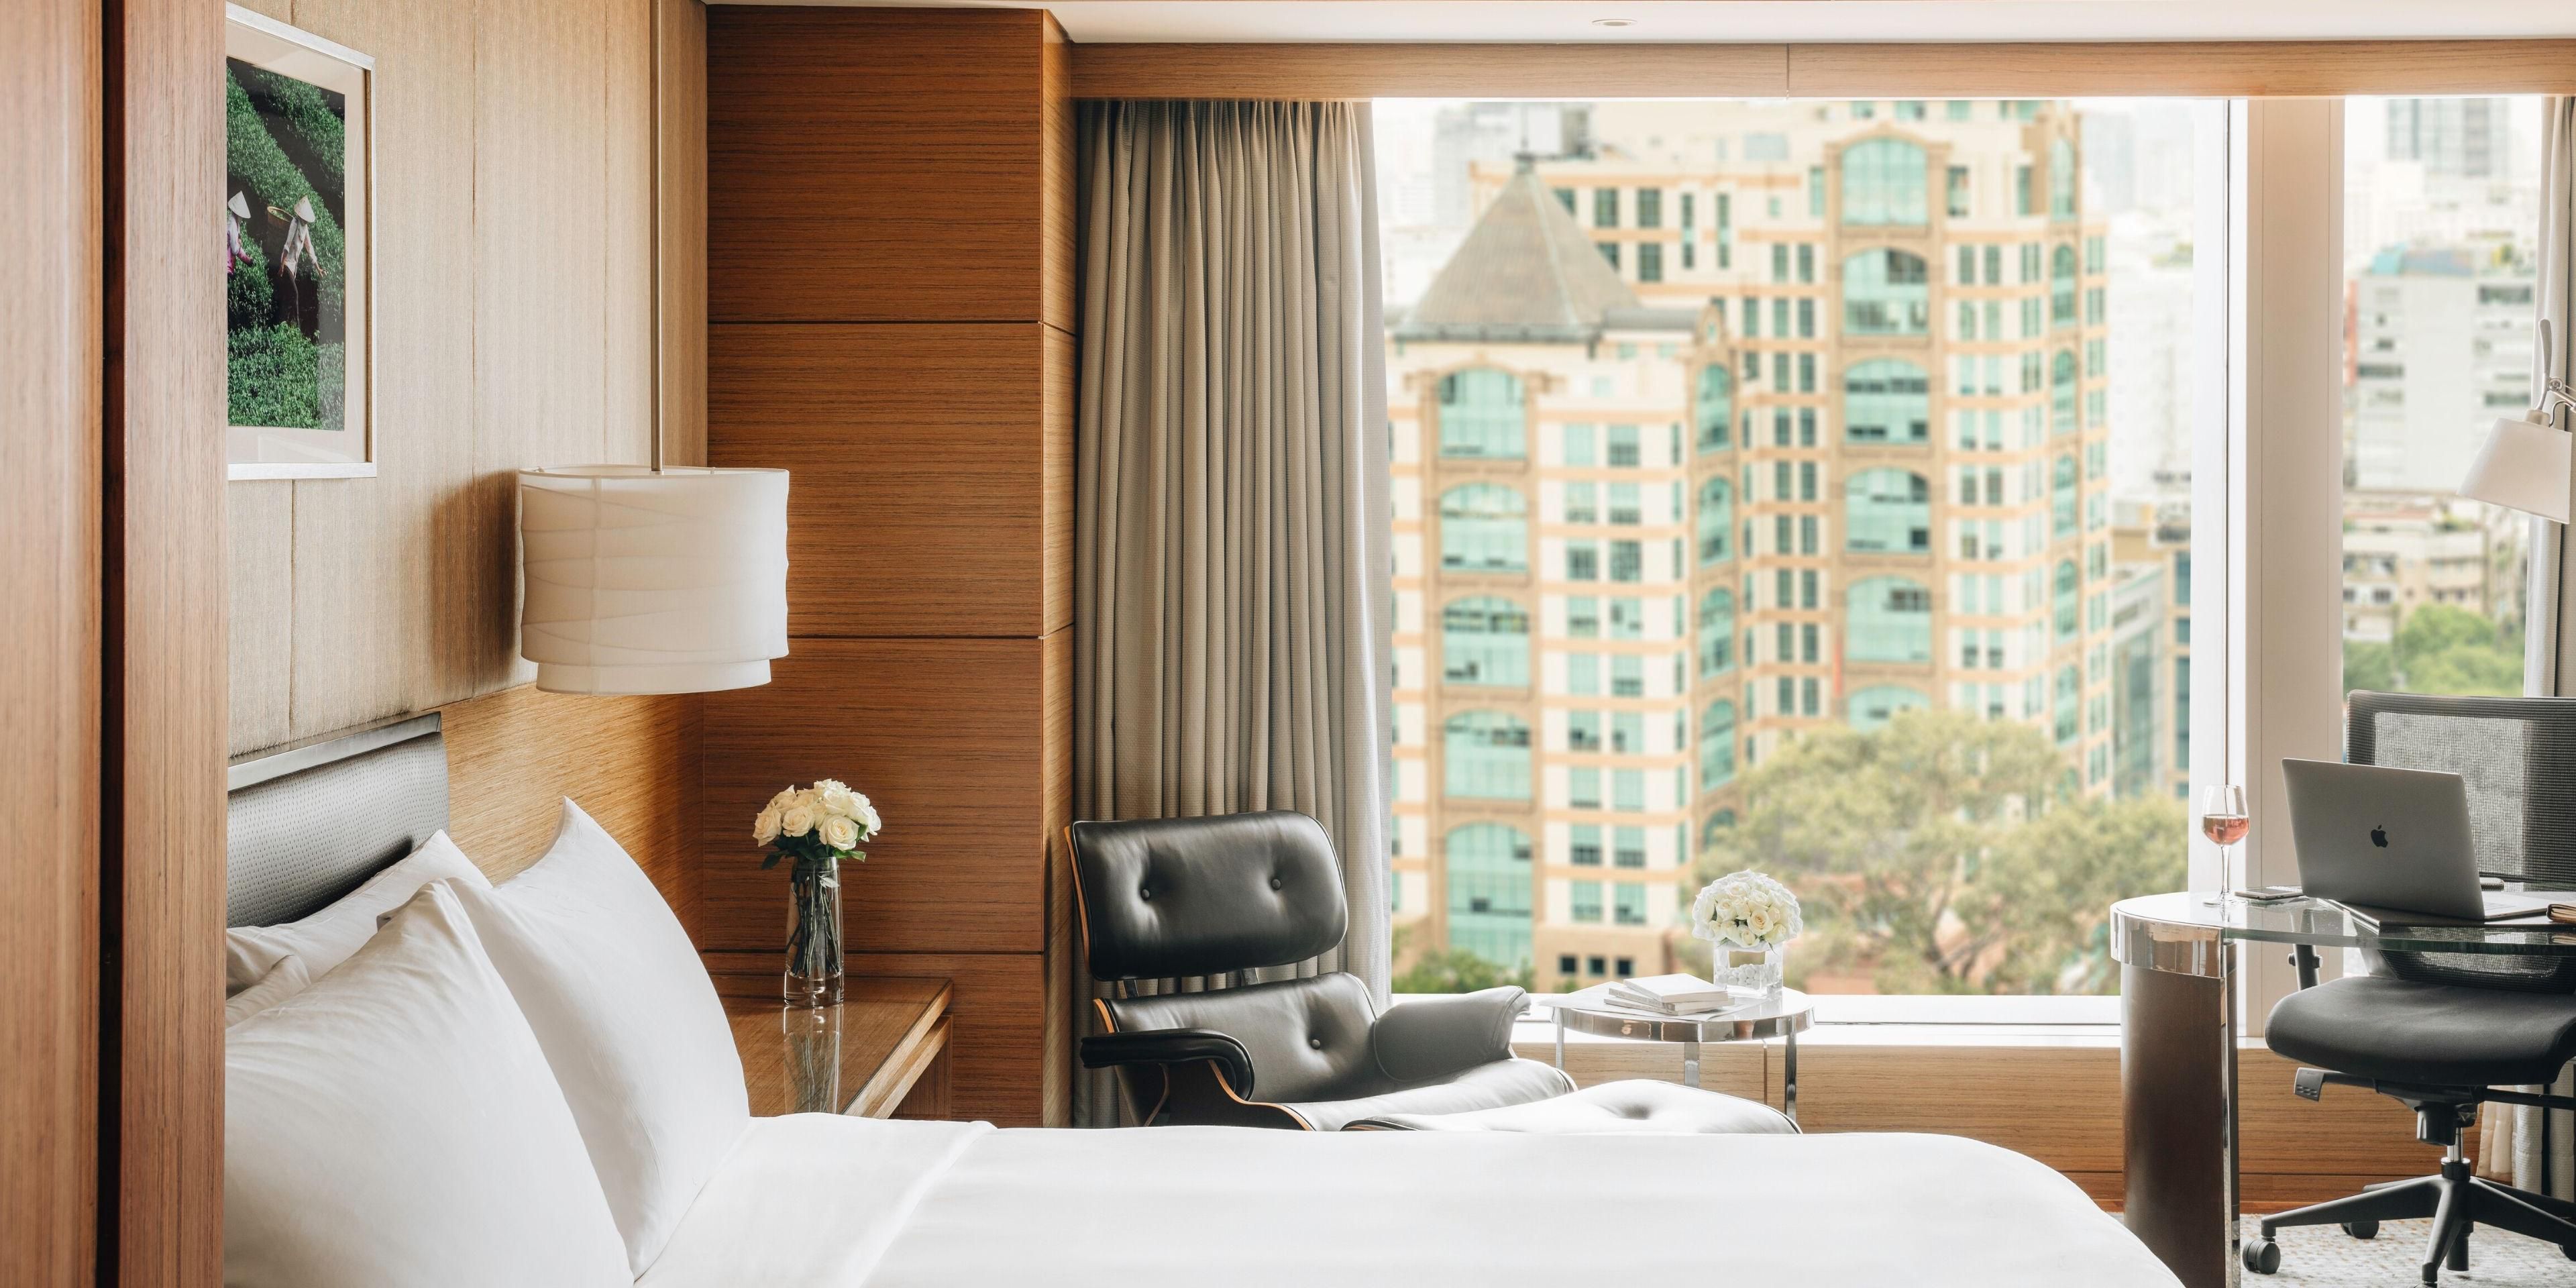 All rooms feature floor-to-ceiling windows that present expansive views of both classic and contemporary Ho Chi Minh City. Guests also have access to high-speed Internet, modern media solutions and world-class facilities.